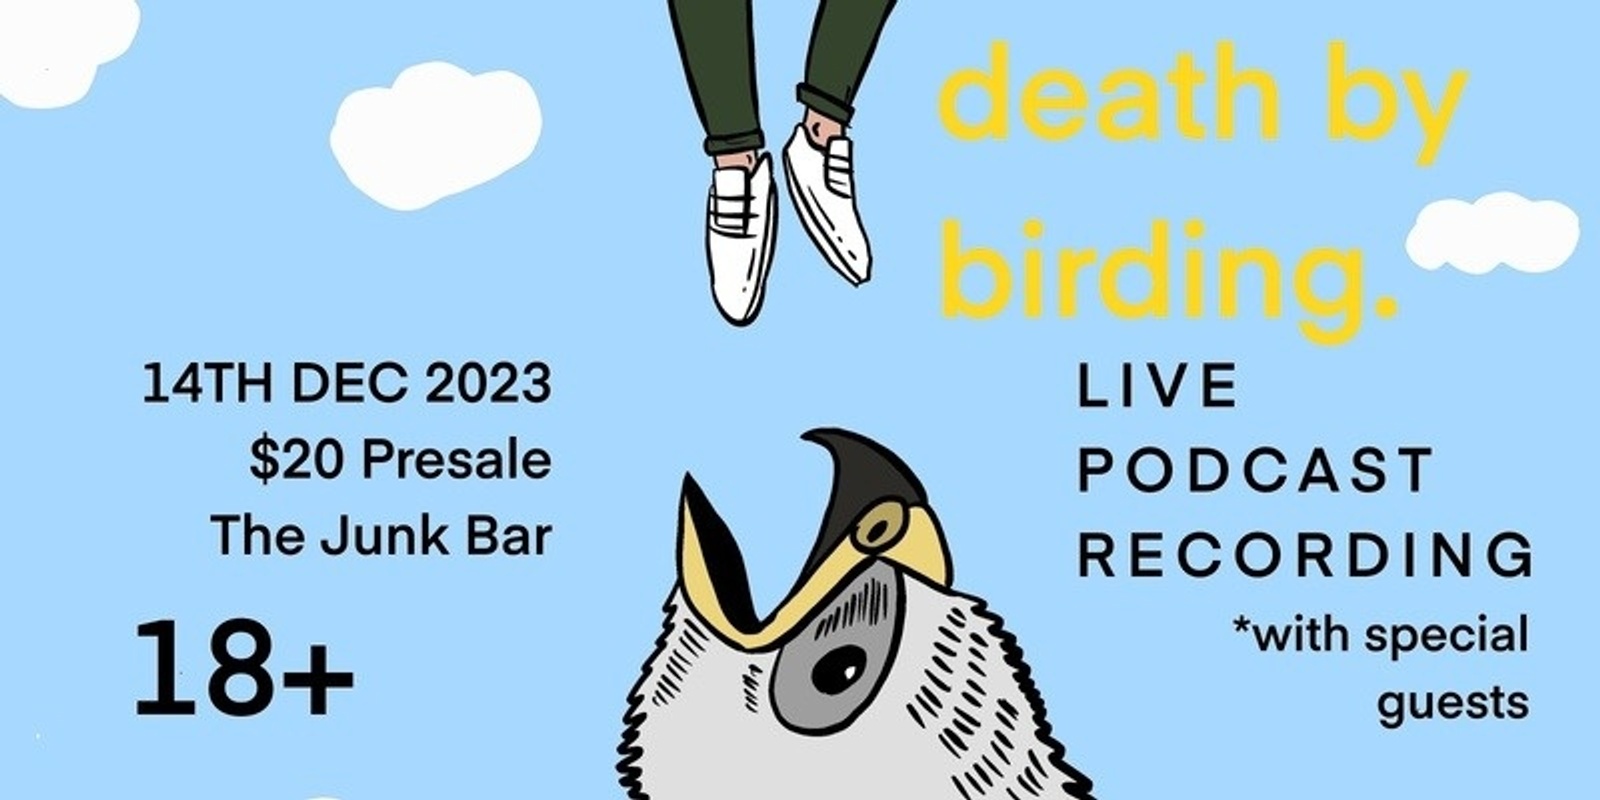 Banner image for SOLD OUT Death by Birding LIVE PODCAST RECORDING